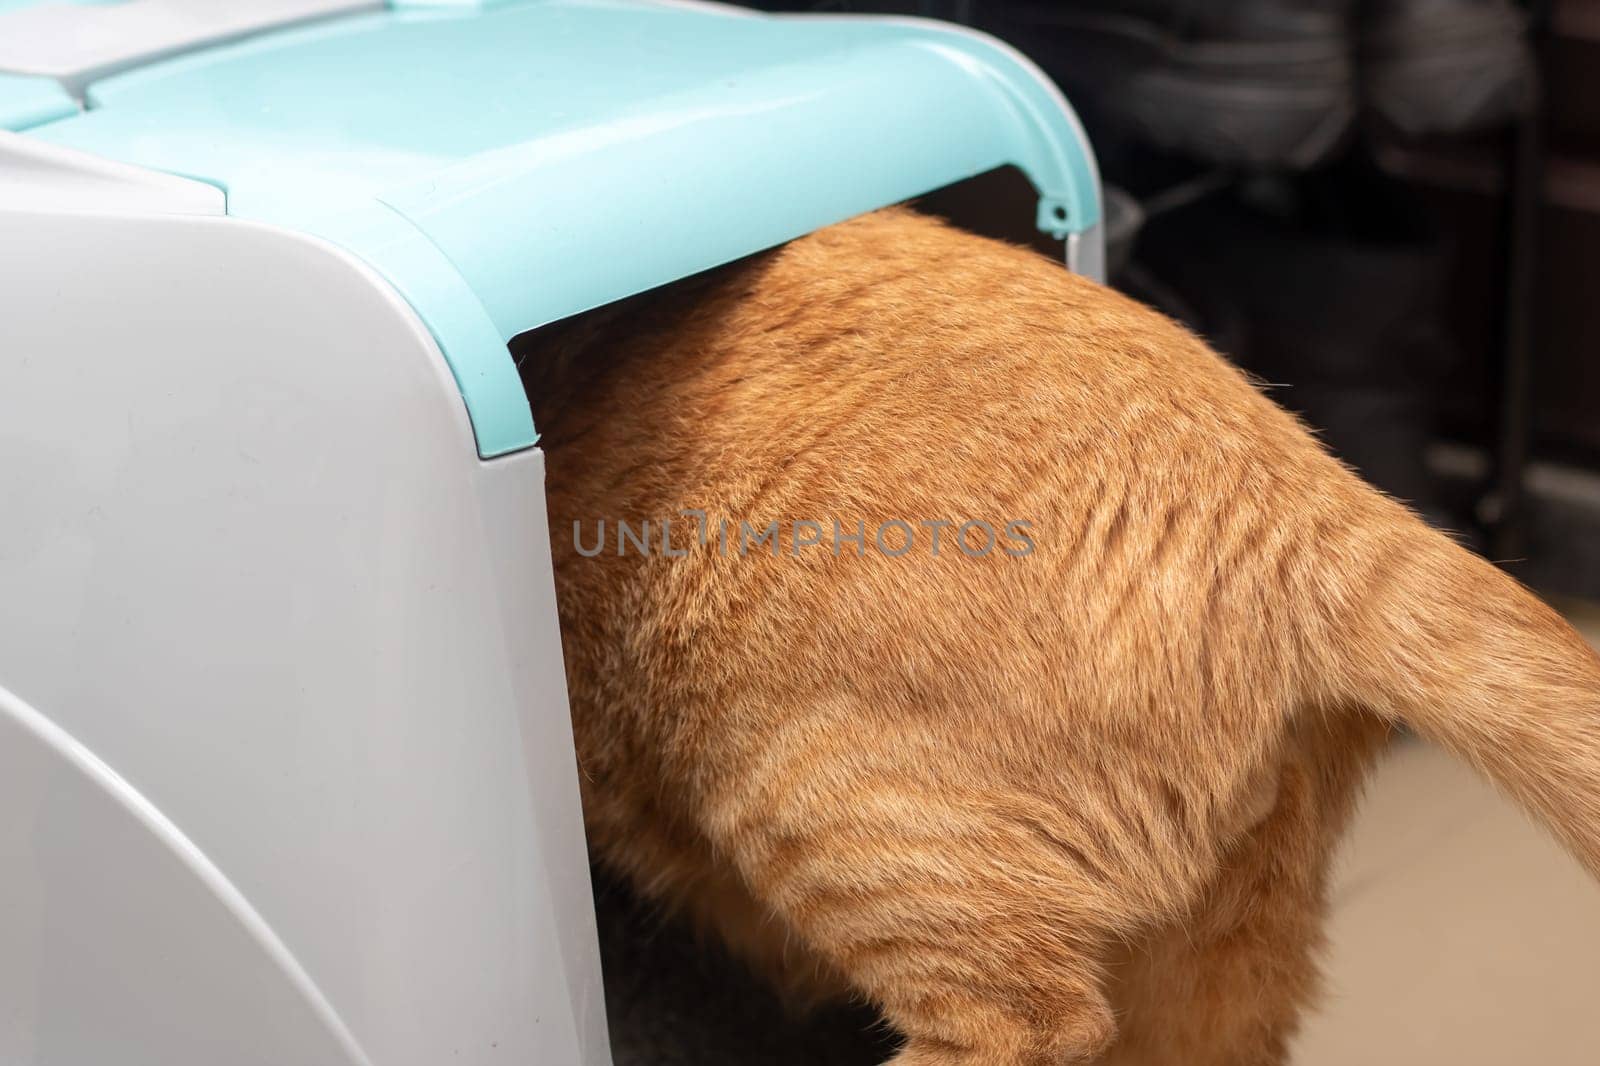 Ginger cat enters a closed litter box close up